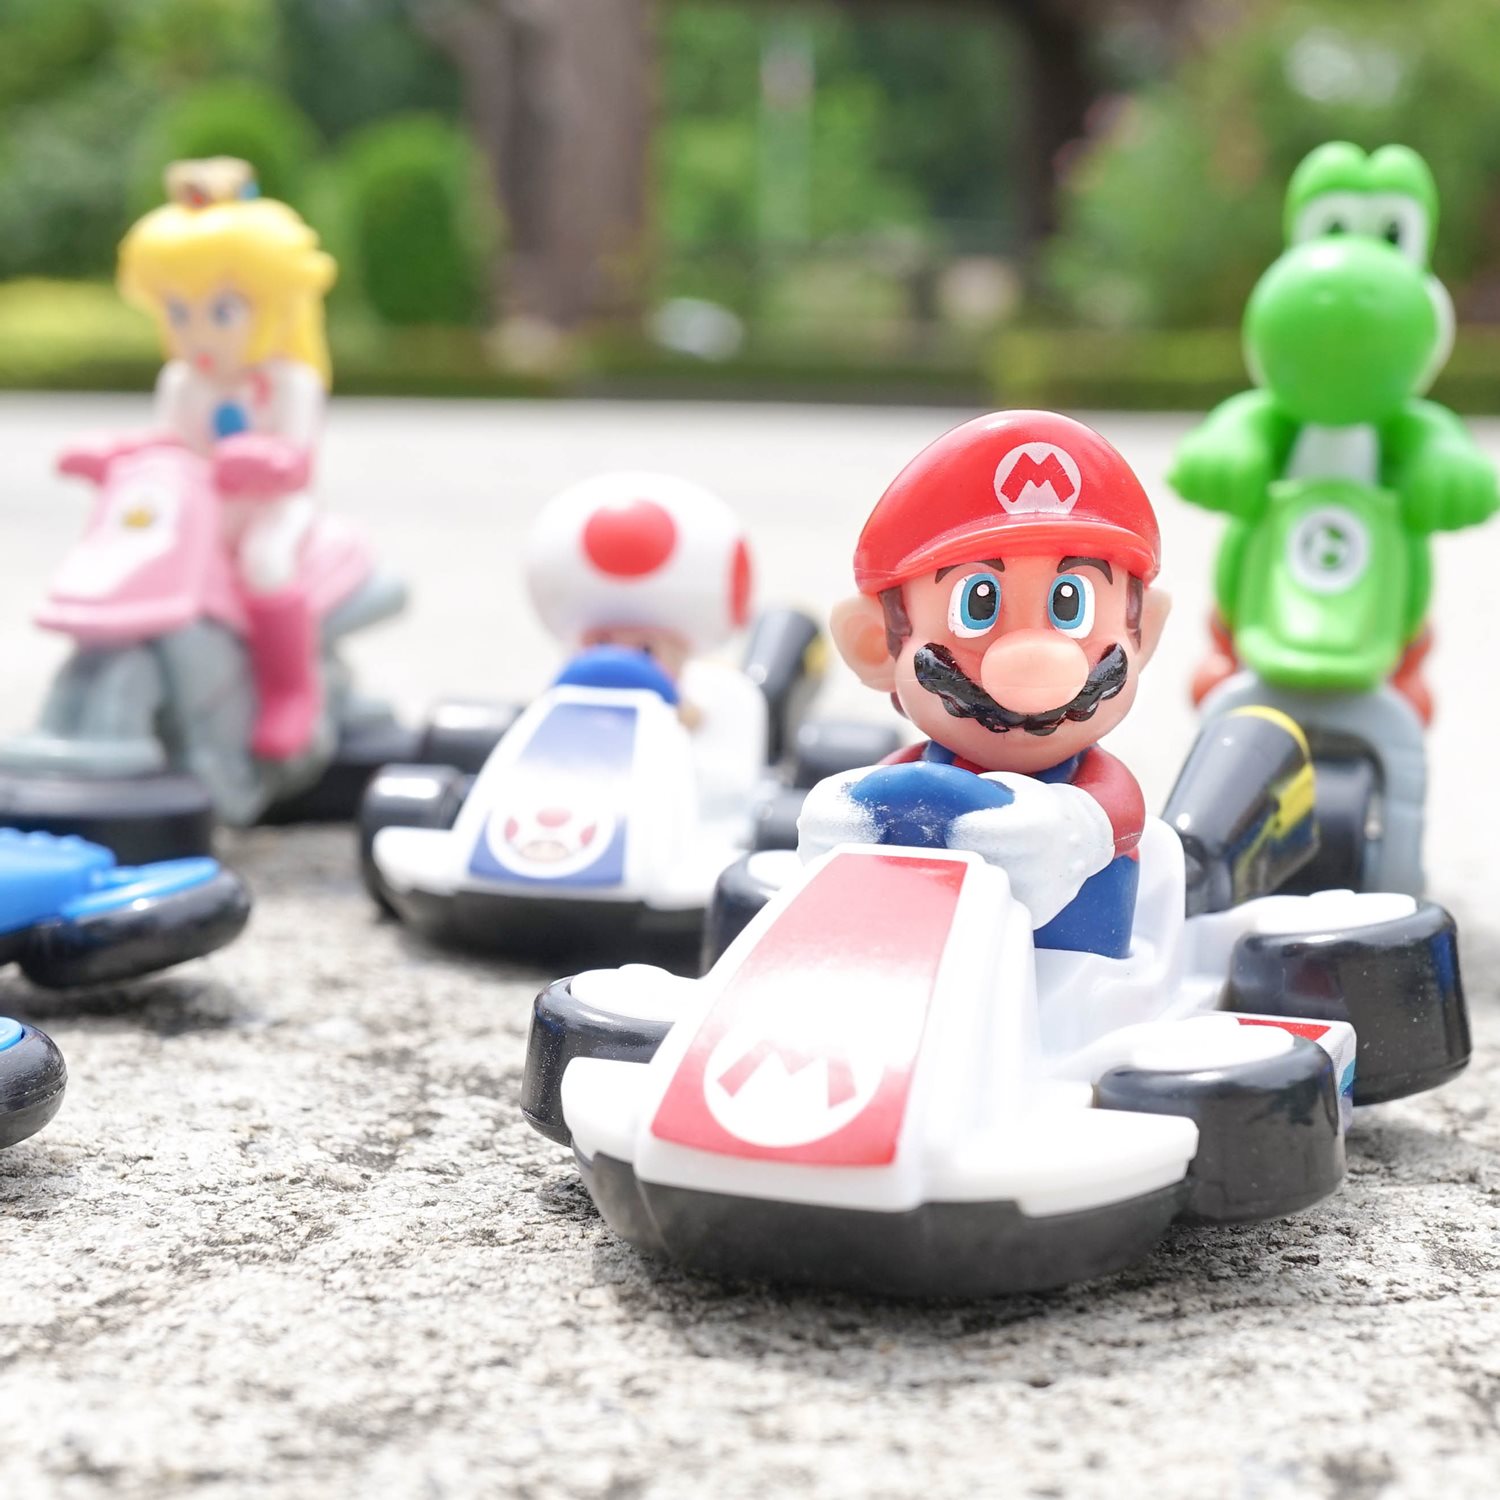  Super Mario and friends from Mario Kart, Go-Kart-Style racing VDO game developed by Nintendo = Shutterstock